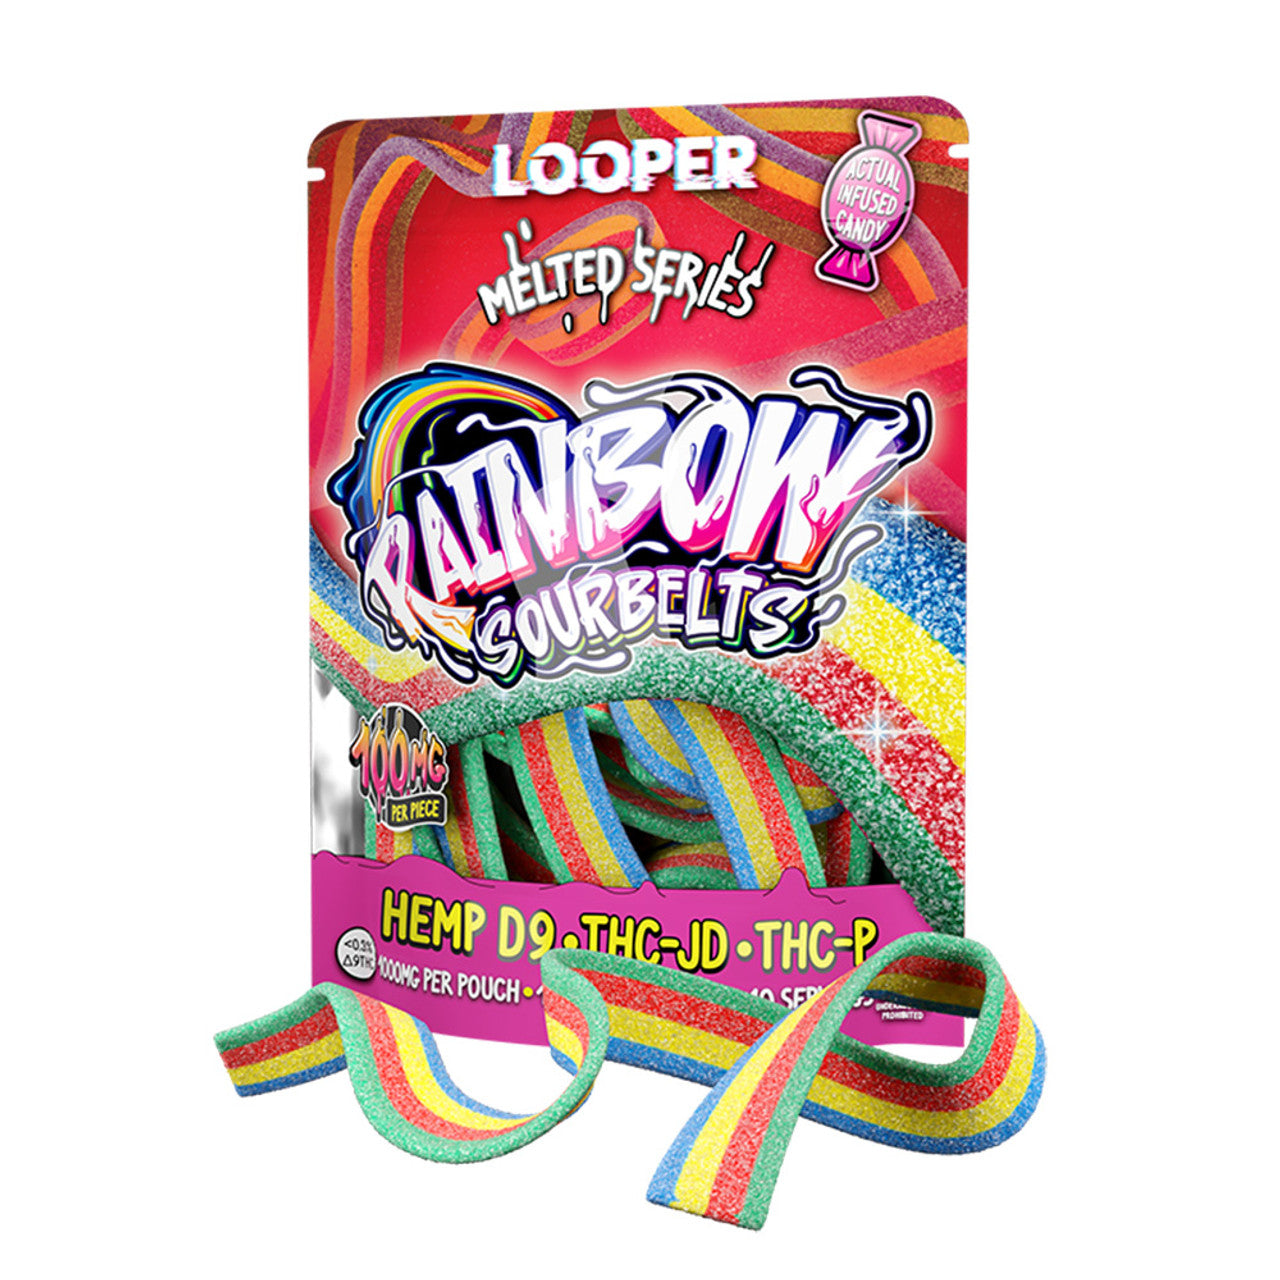 Looper Melted Series D9/THC-JD/THC-P 1000mg Sour Belts - Sky High West Chester